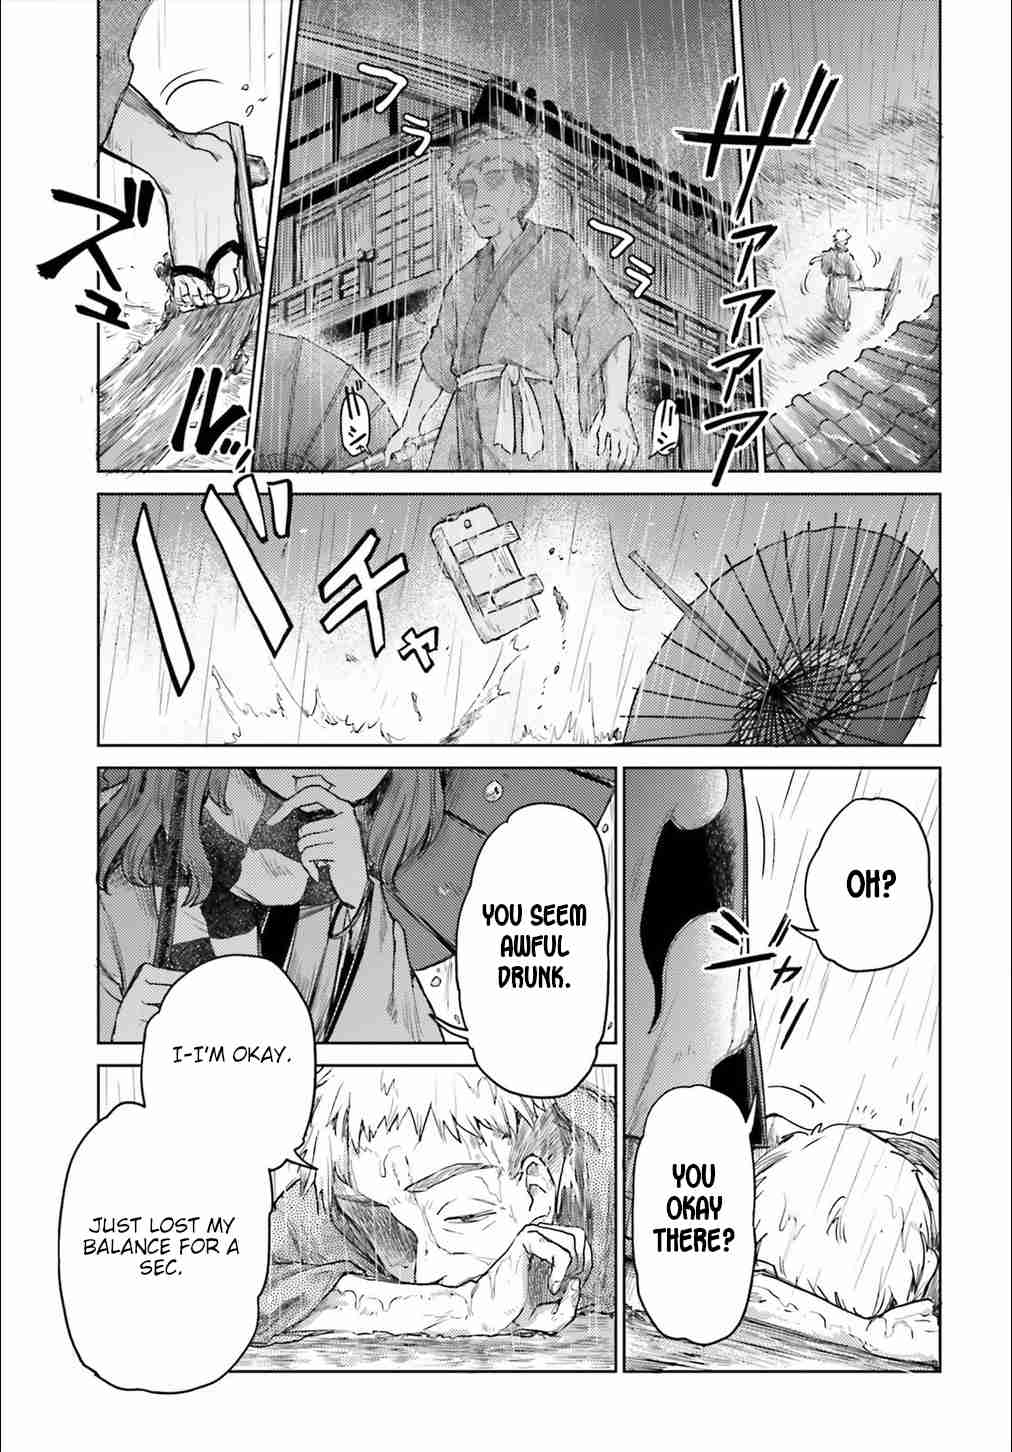 Touhou Suichouka ~ Lotus Eater tachi no Suisei Vol. 1 Ch. 6 No Youkai Stands in a Place Without Sake (Part 1)